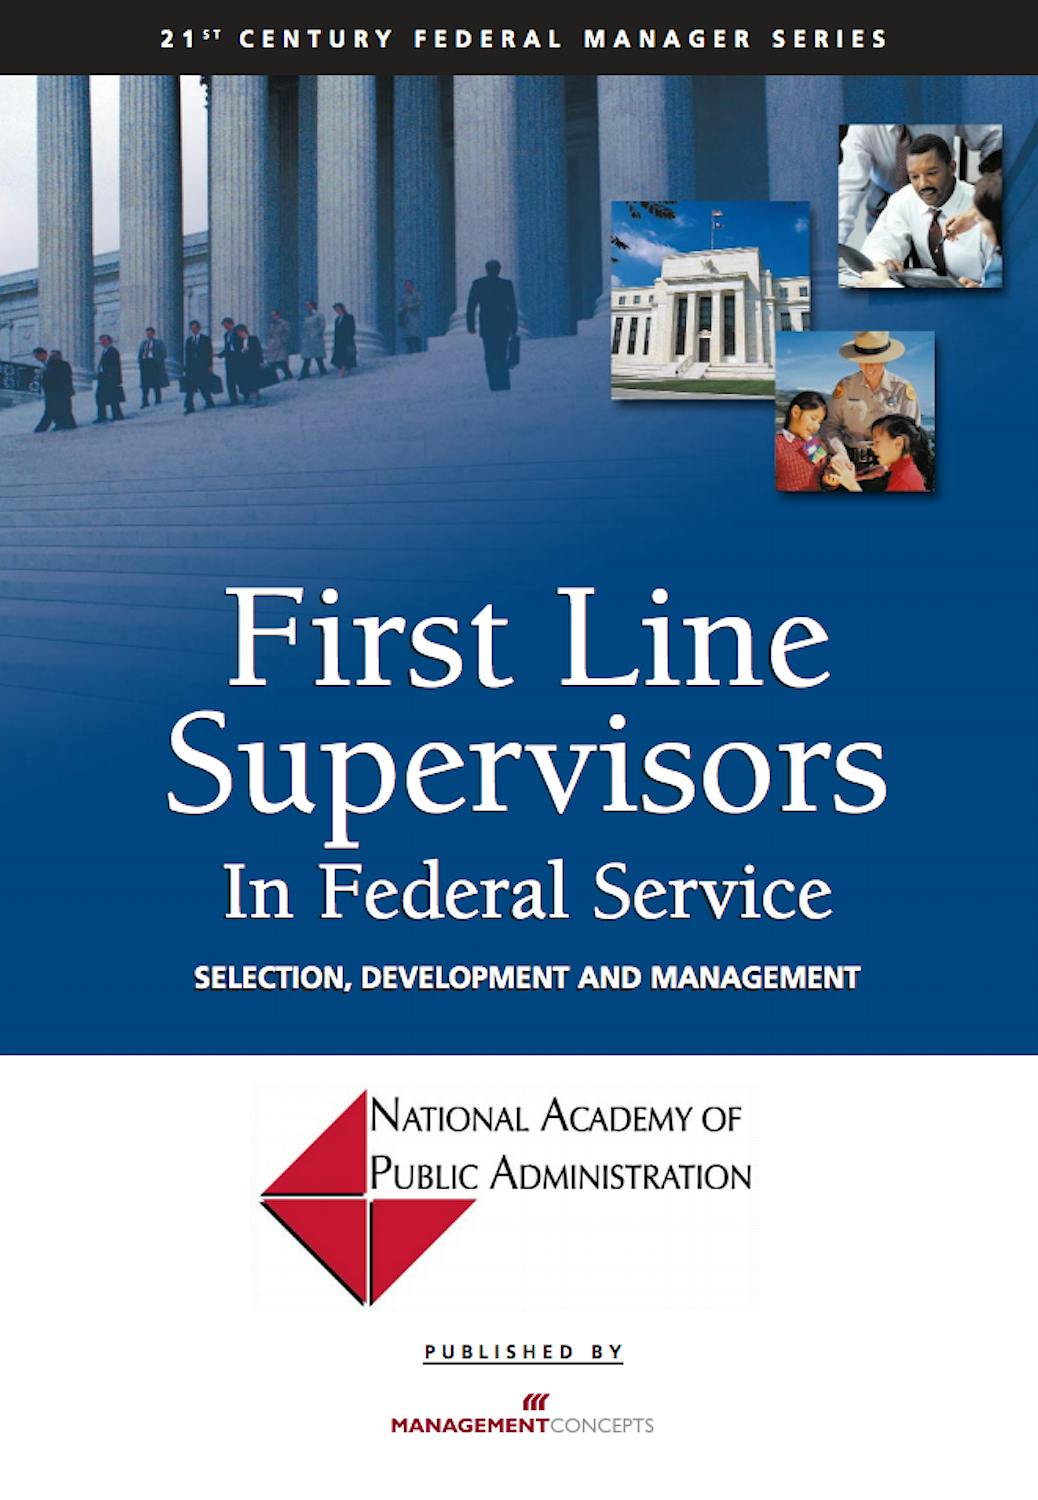 03 05 First Line Supervisors In Federal Service